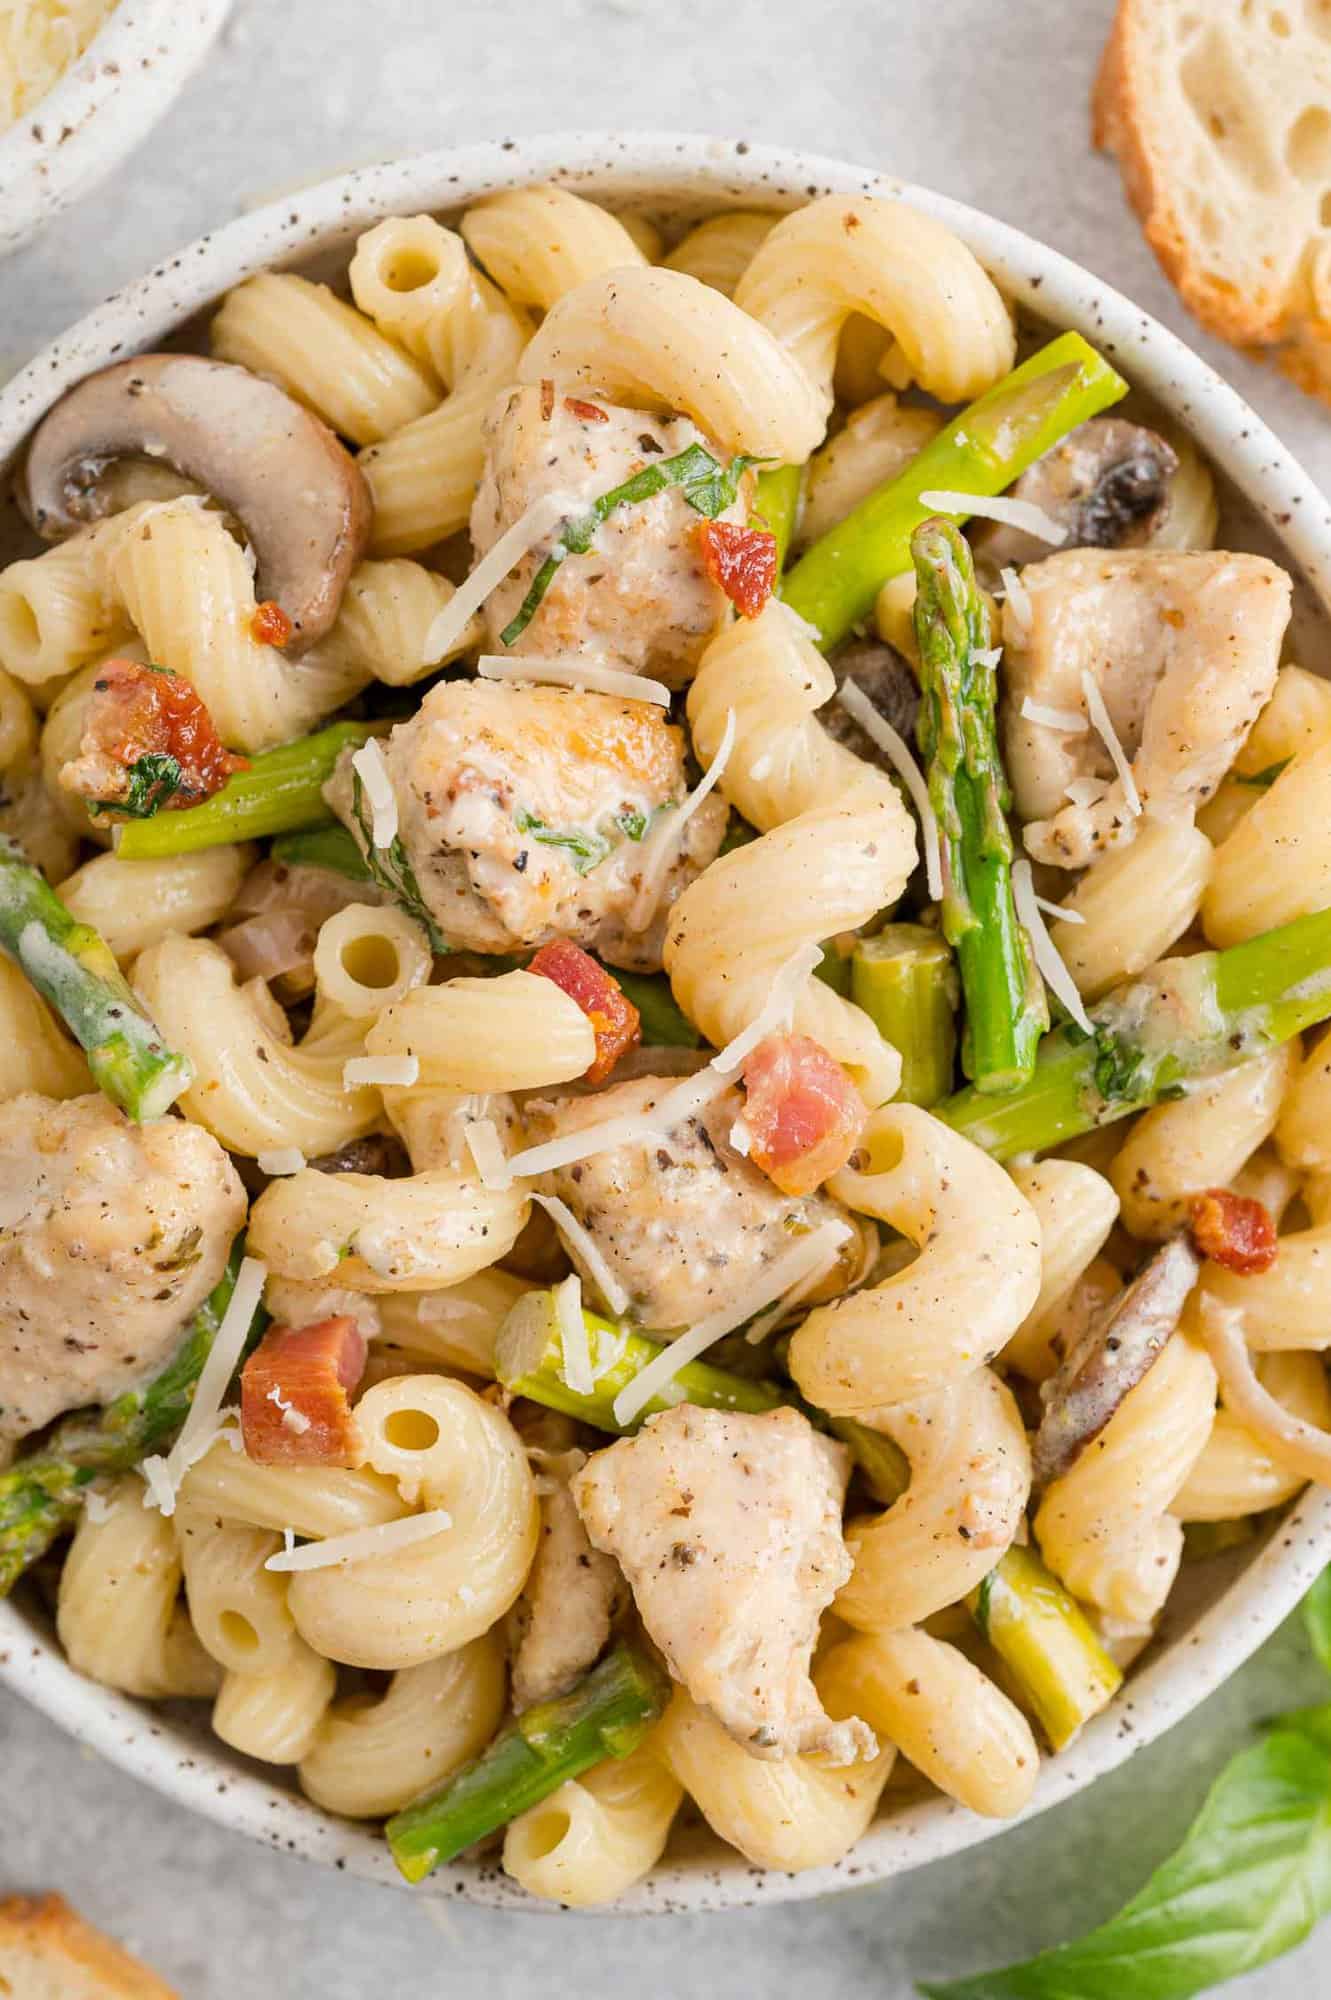 Pasta and asparagus with chicken in a bowl.